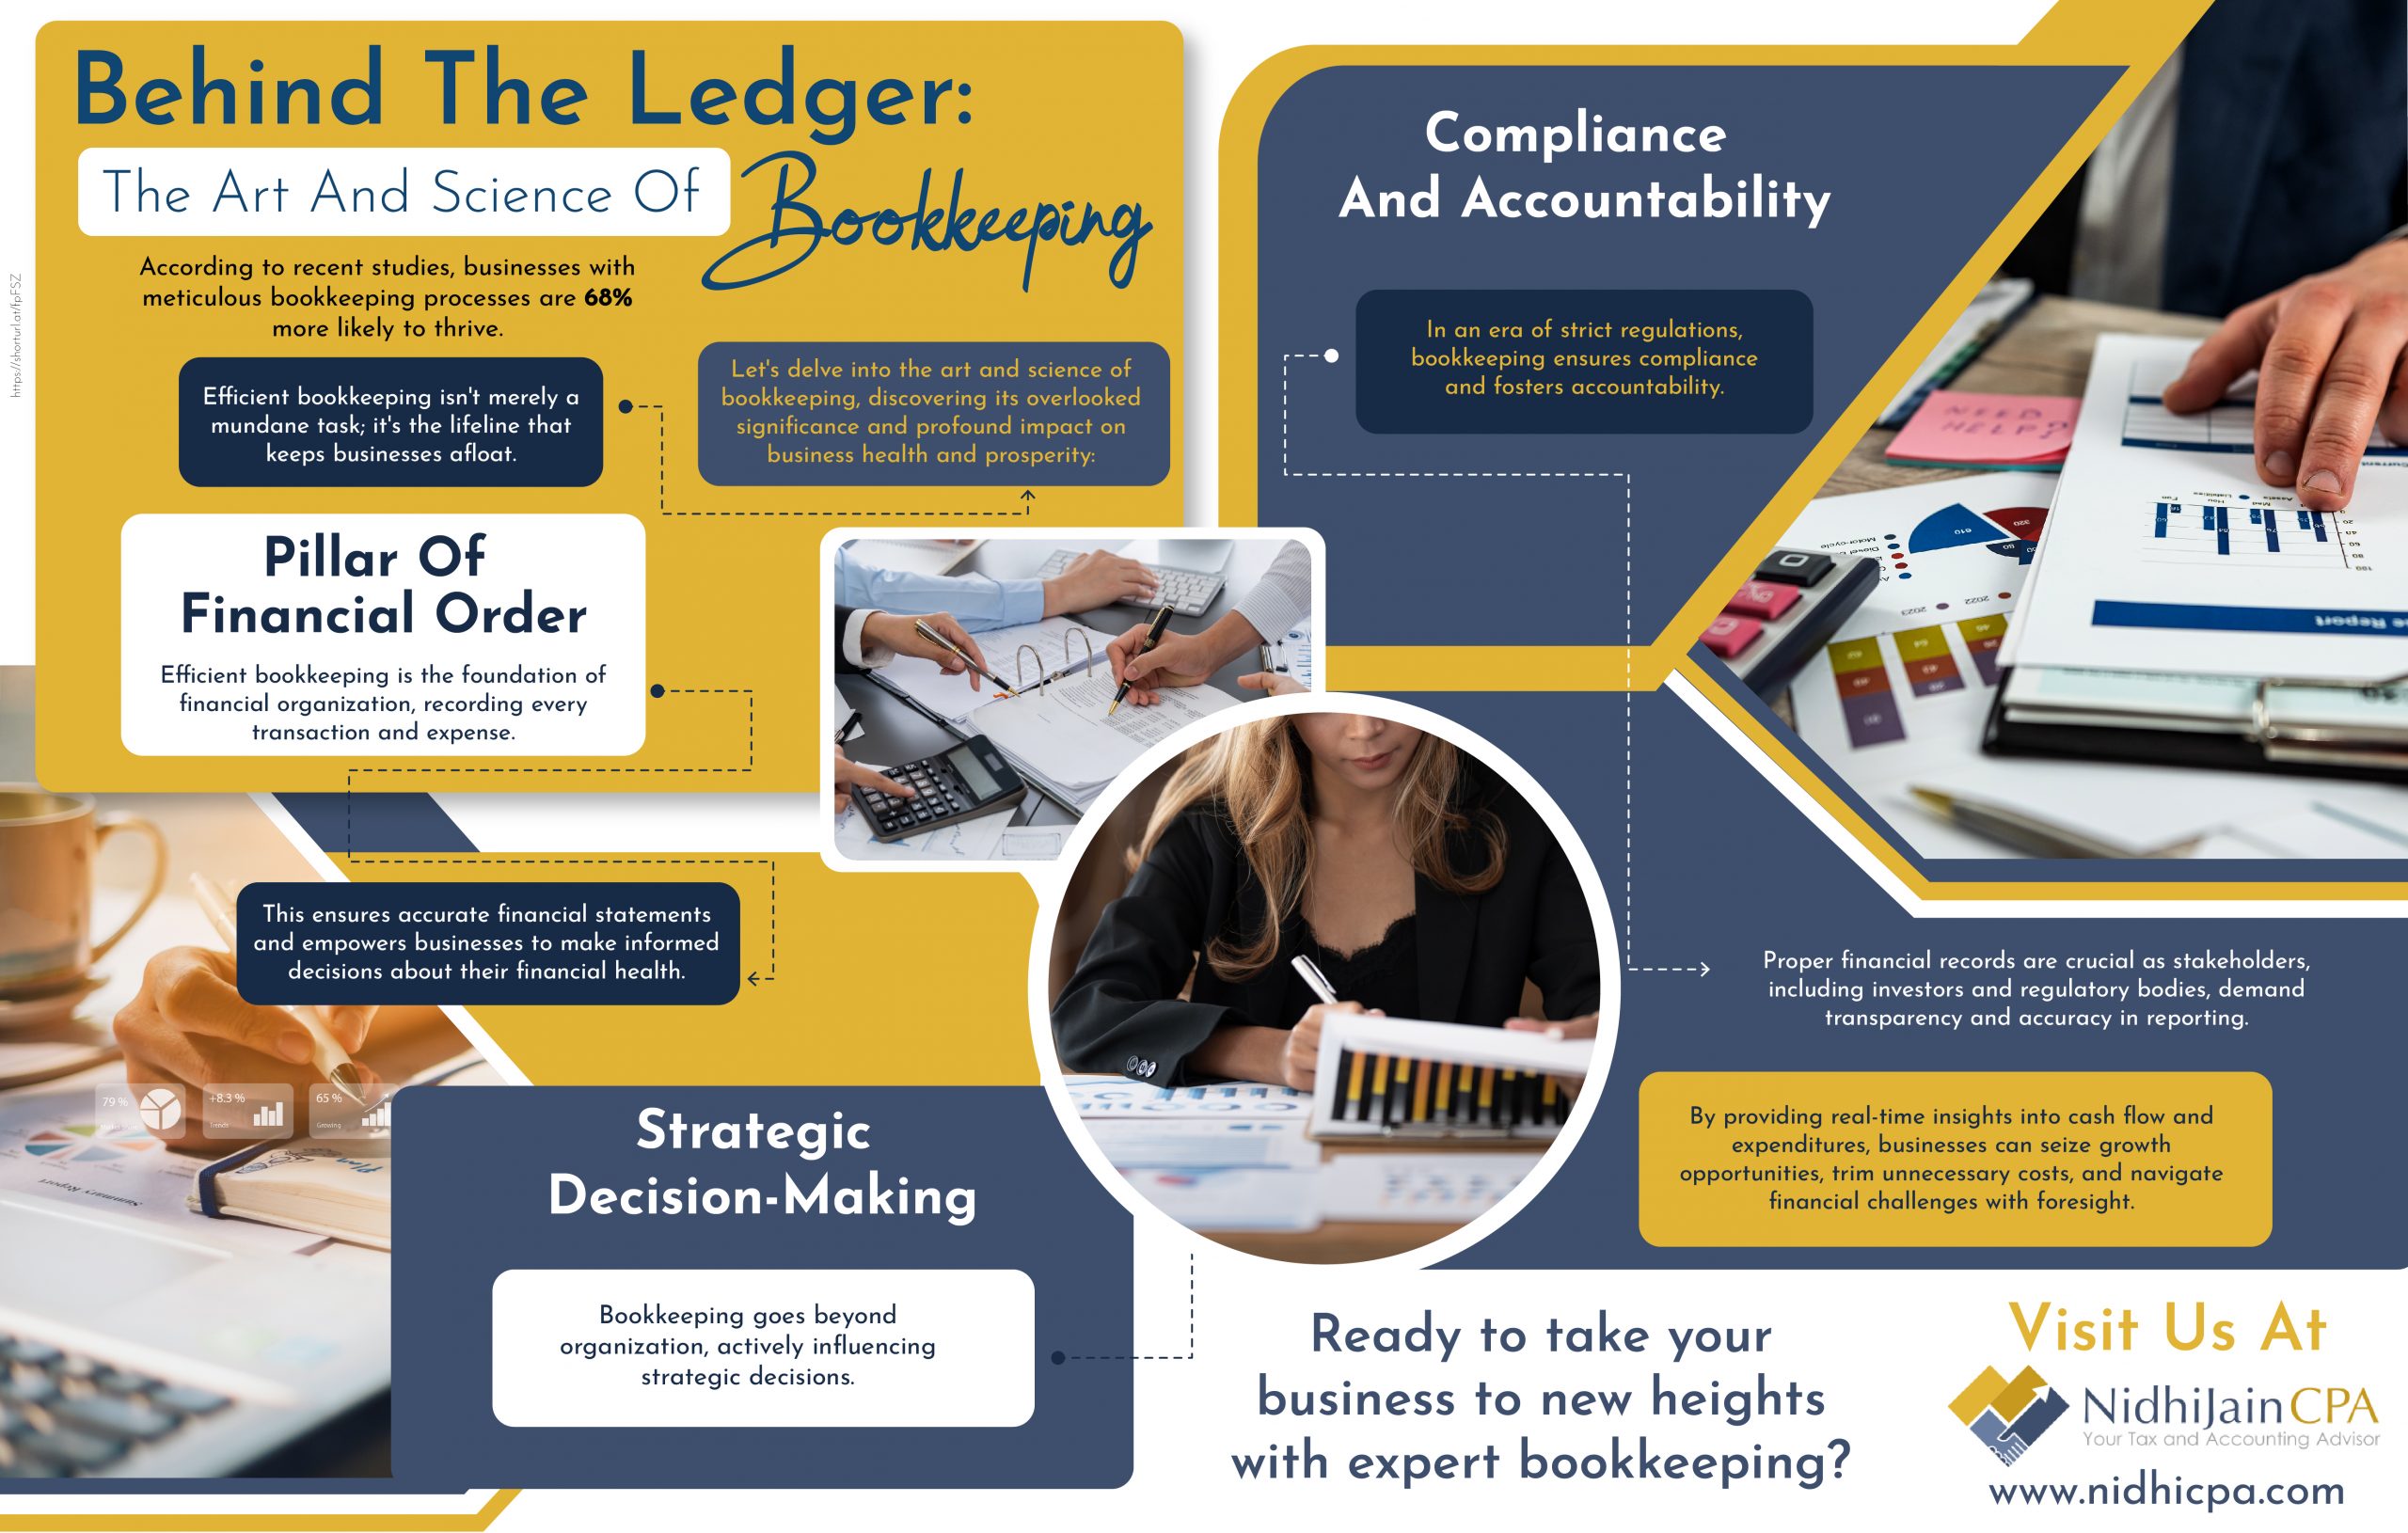 Behind The Ledger: The Art And Science Of Bookkeeping